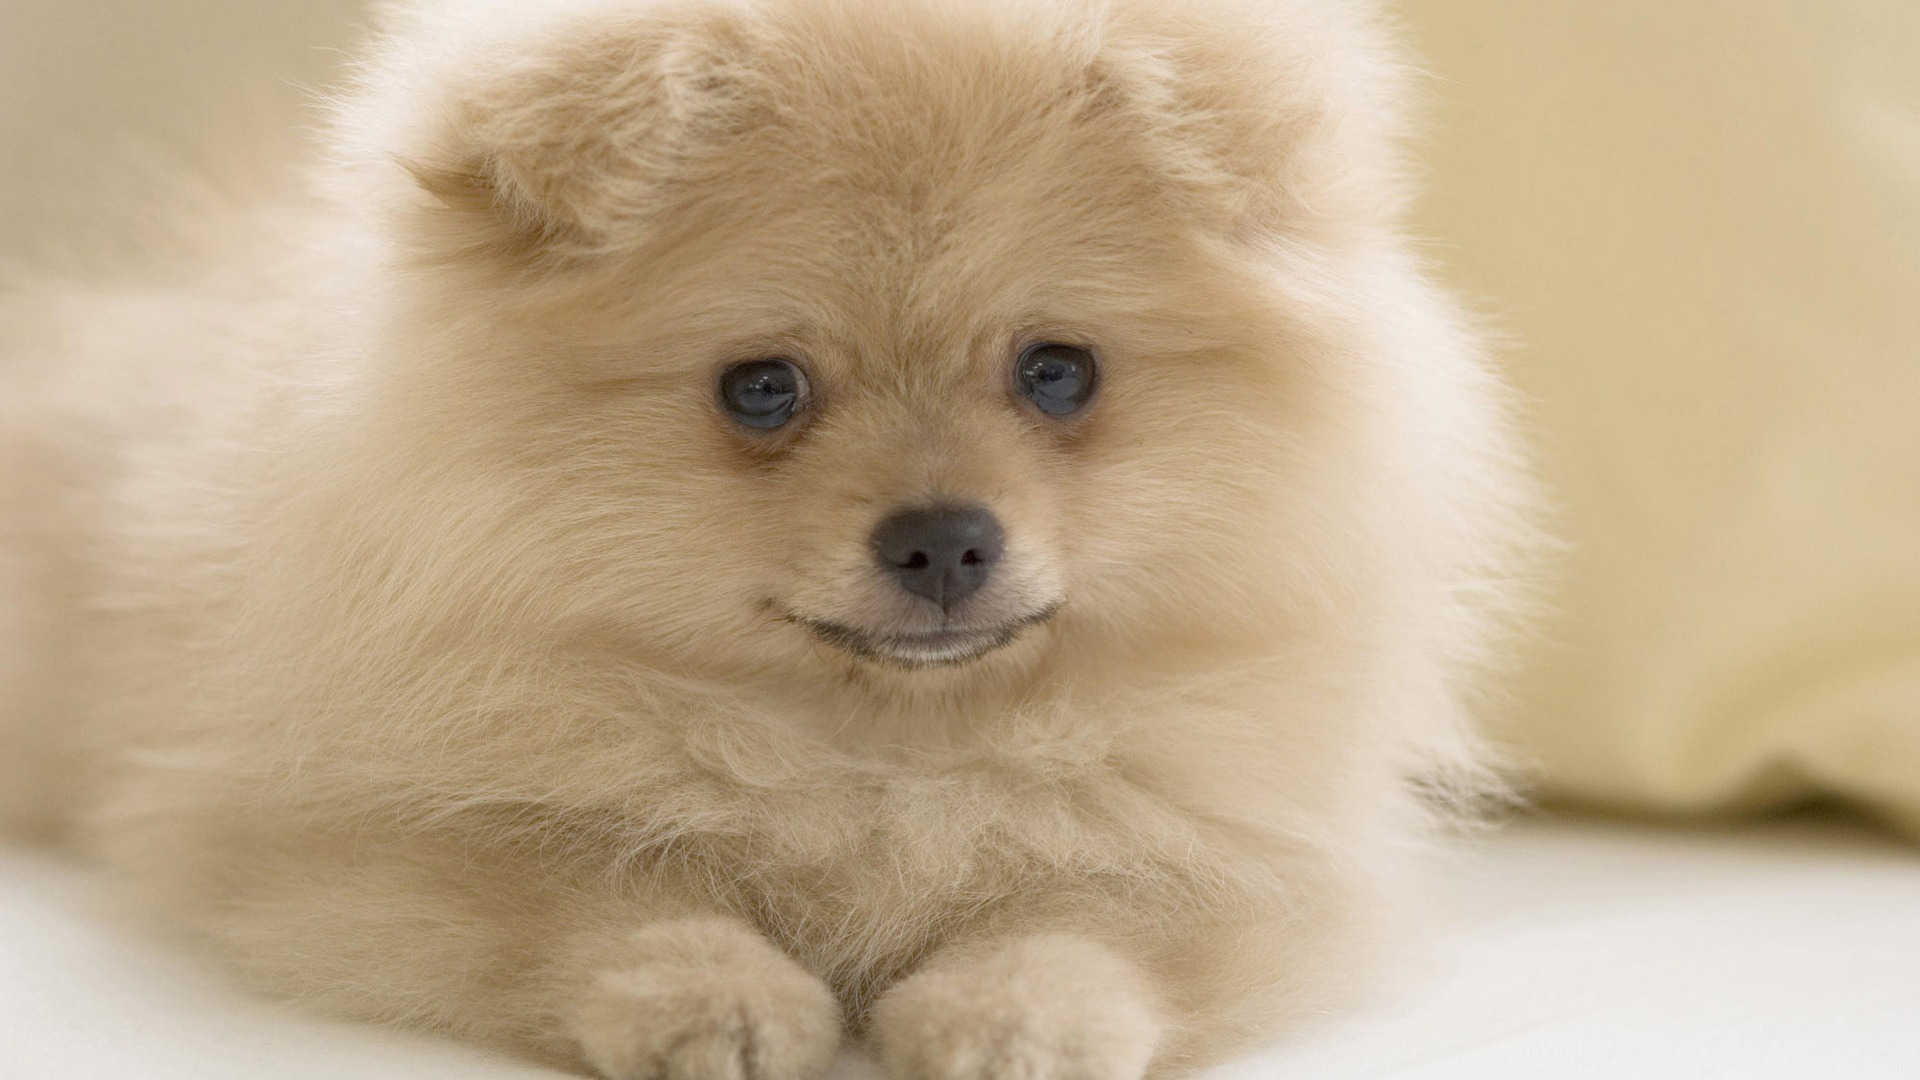 Puppy Photo HD wallpapers (10) #12 - 1920x1080